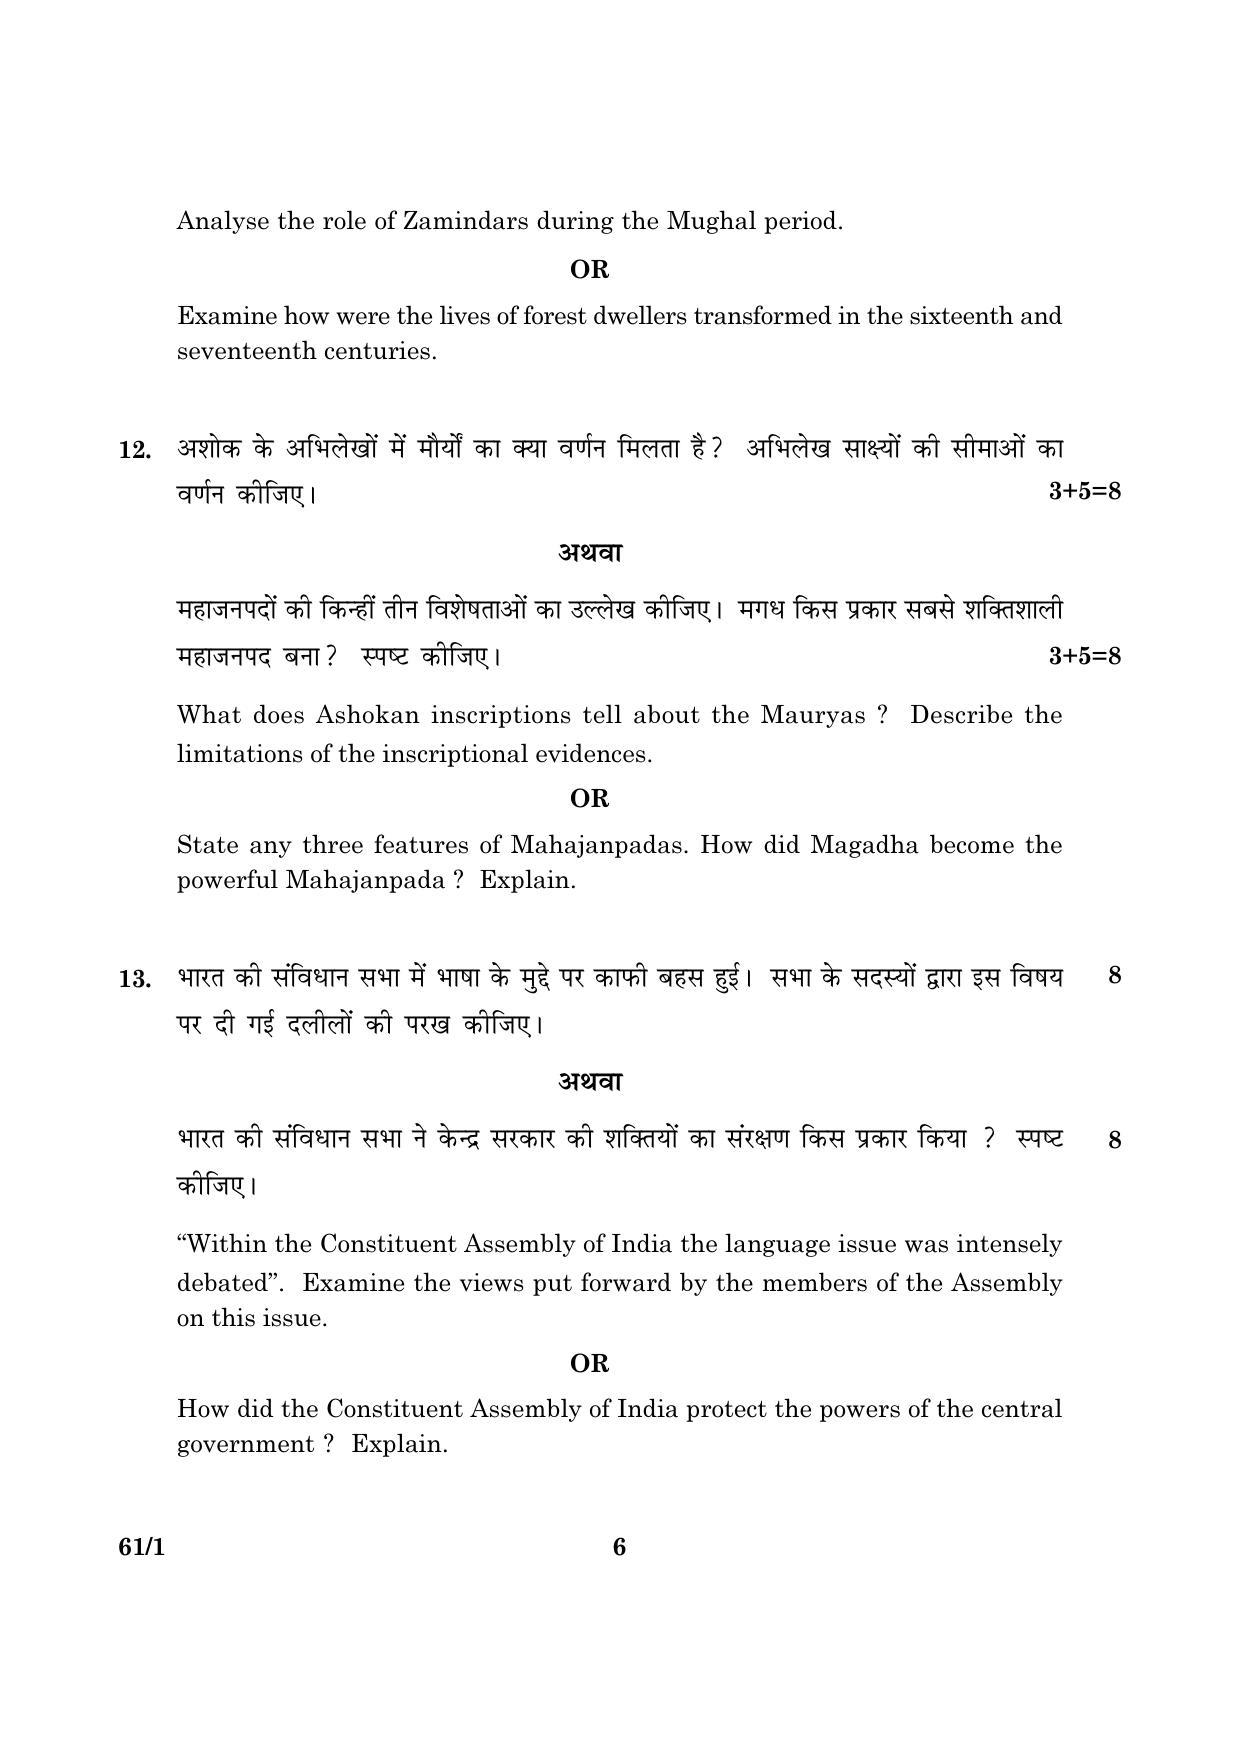 CBSE Class 12 061 Set 1 History 2016 Question Paper - Page 6